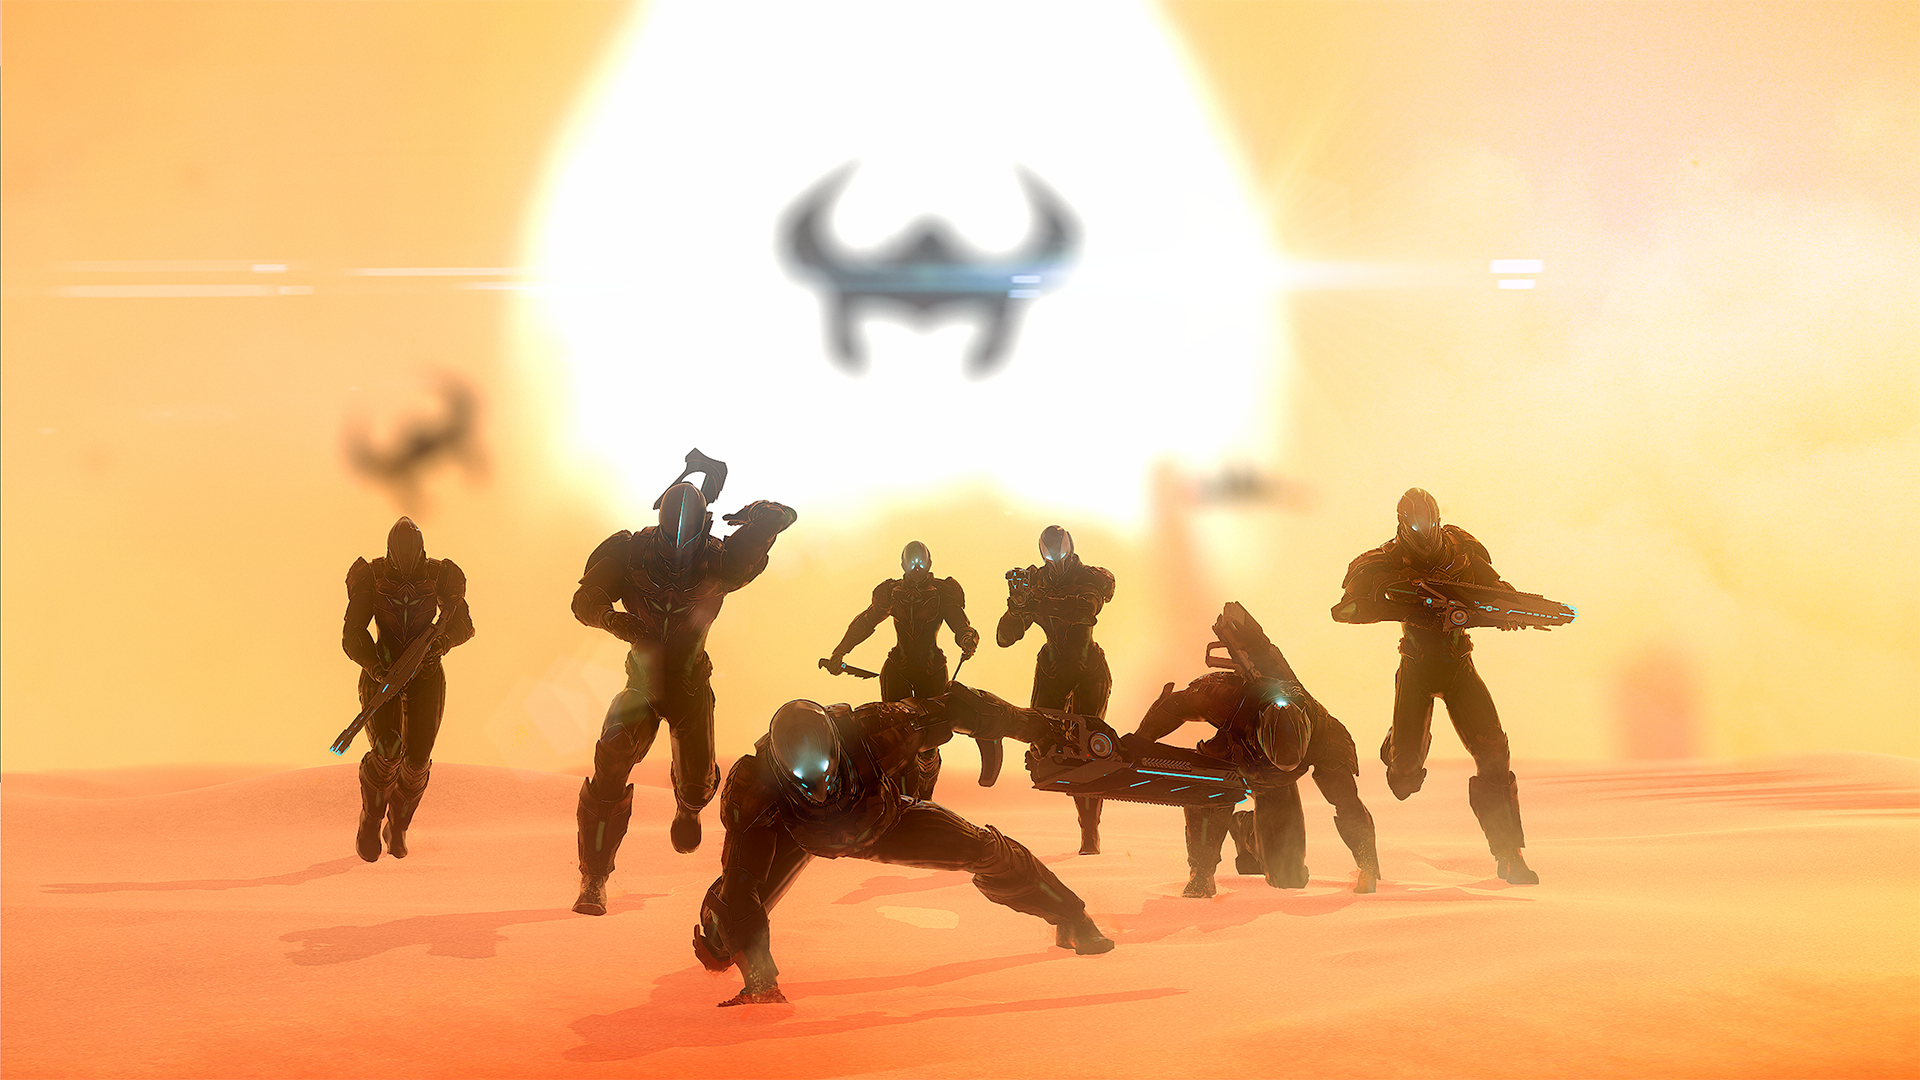 1920x1080 Lets talk VS and their issues. | Page 7 | PlanetSide 2 Forums